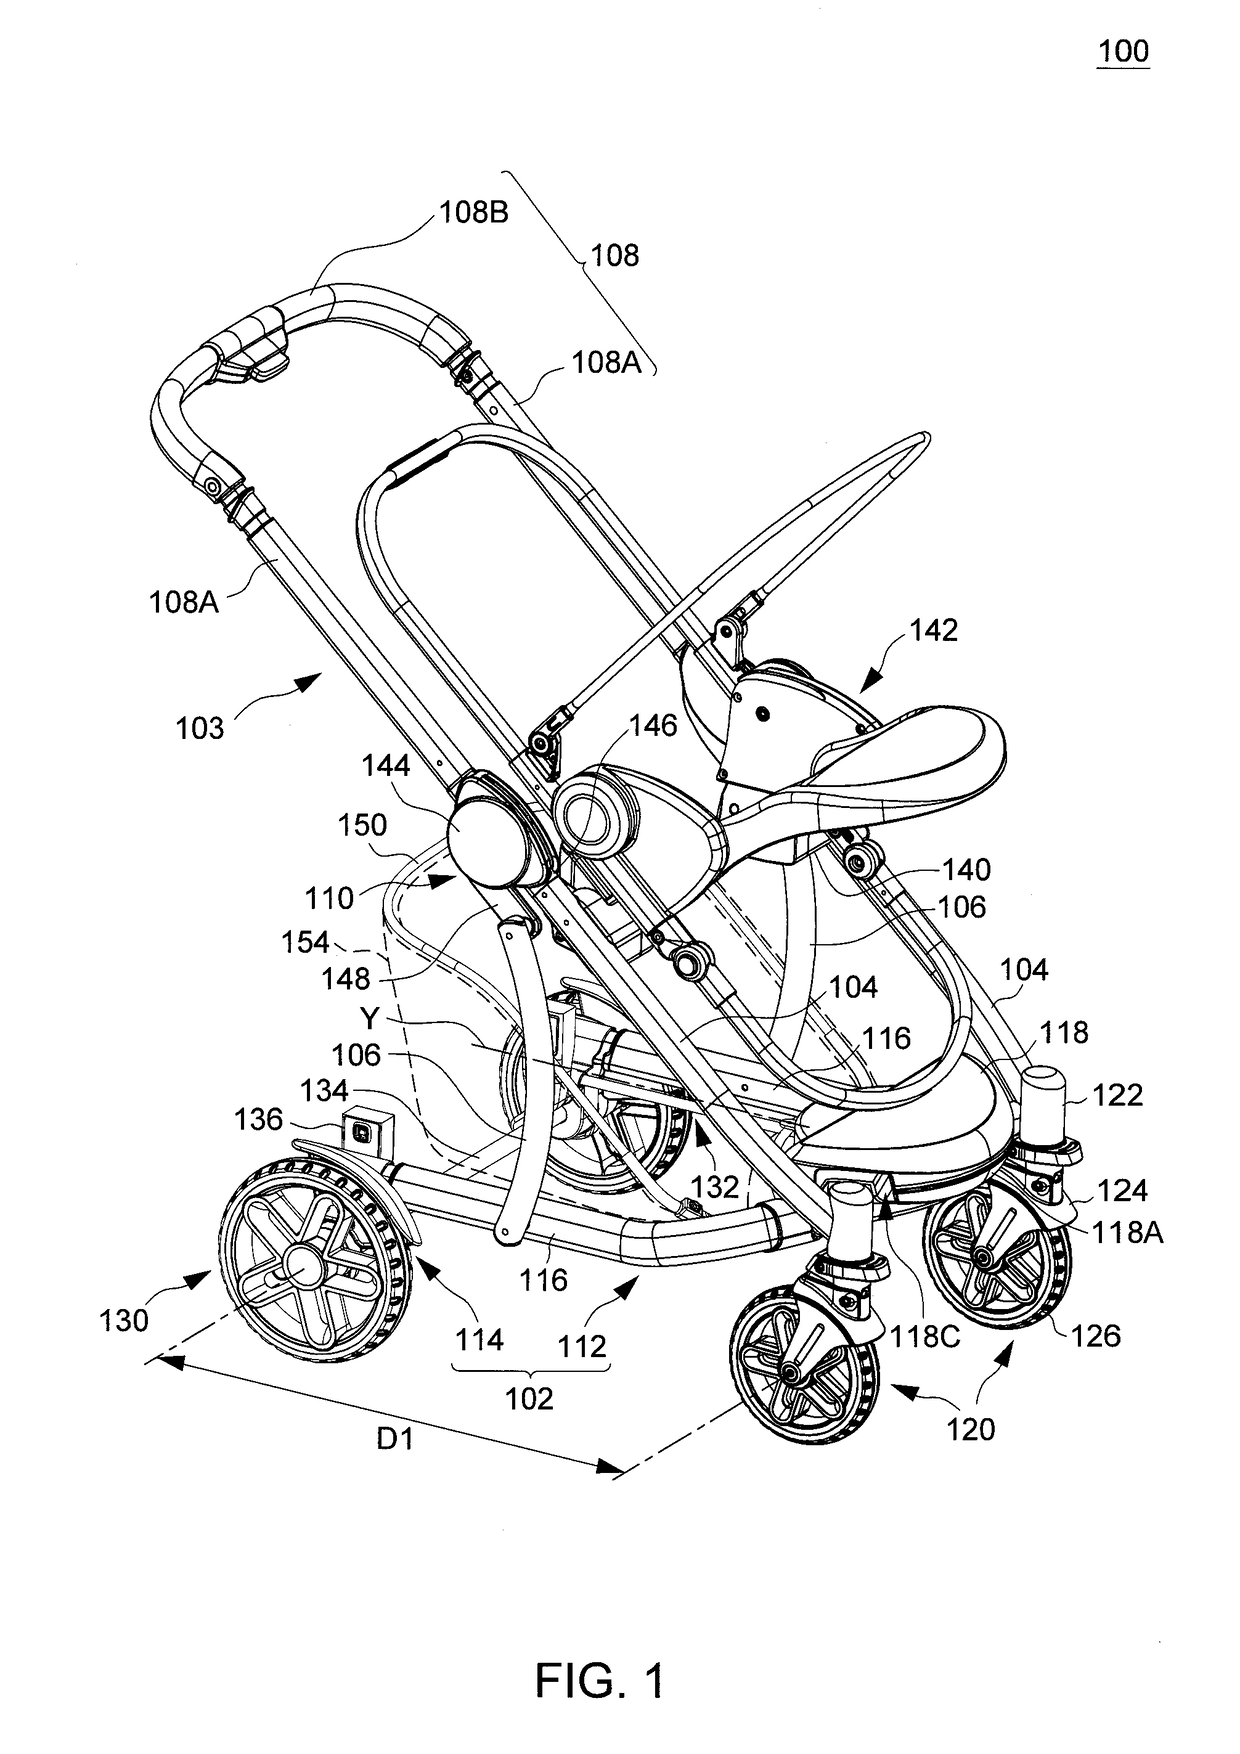 Child stroller apparatus having an expandable frame